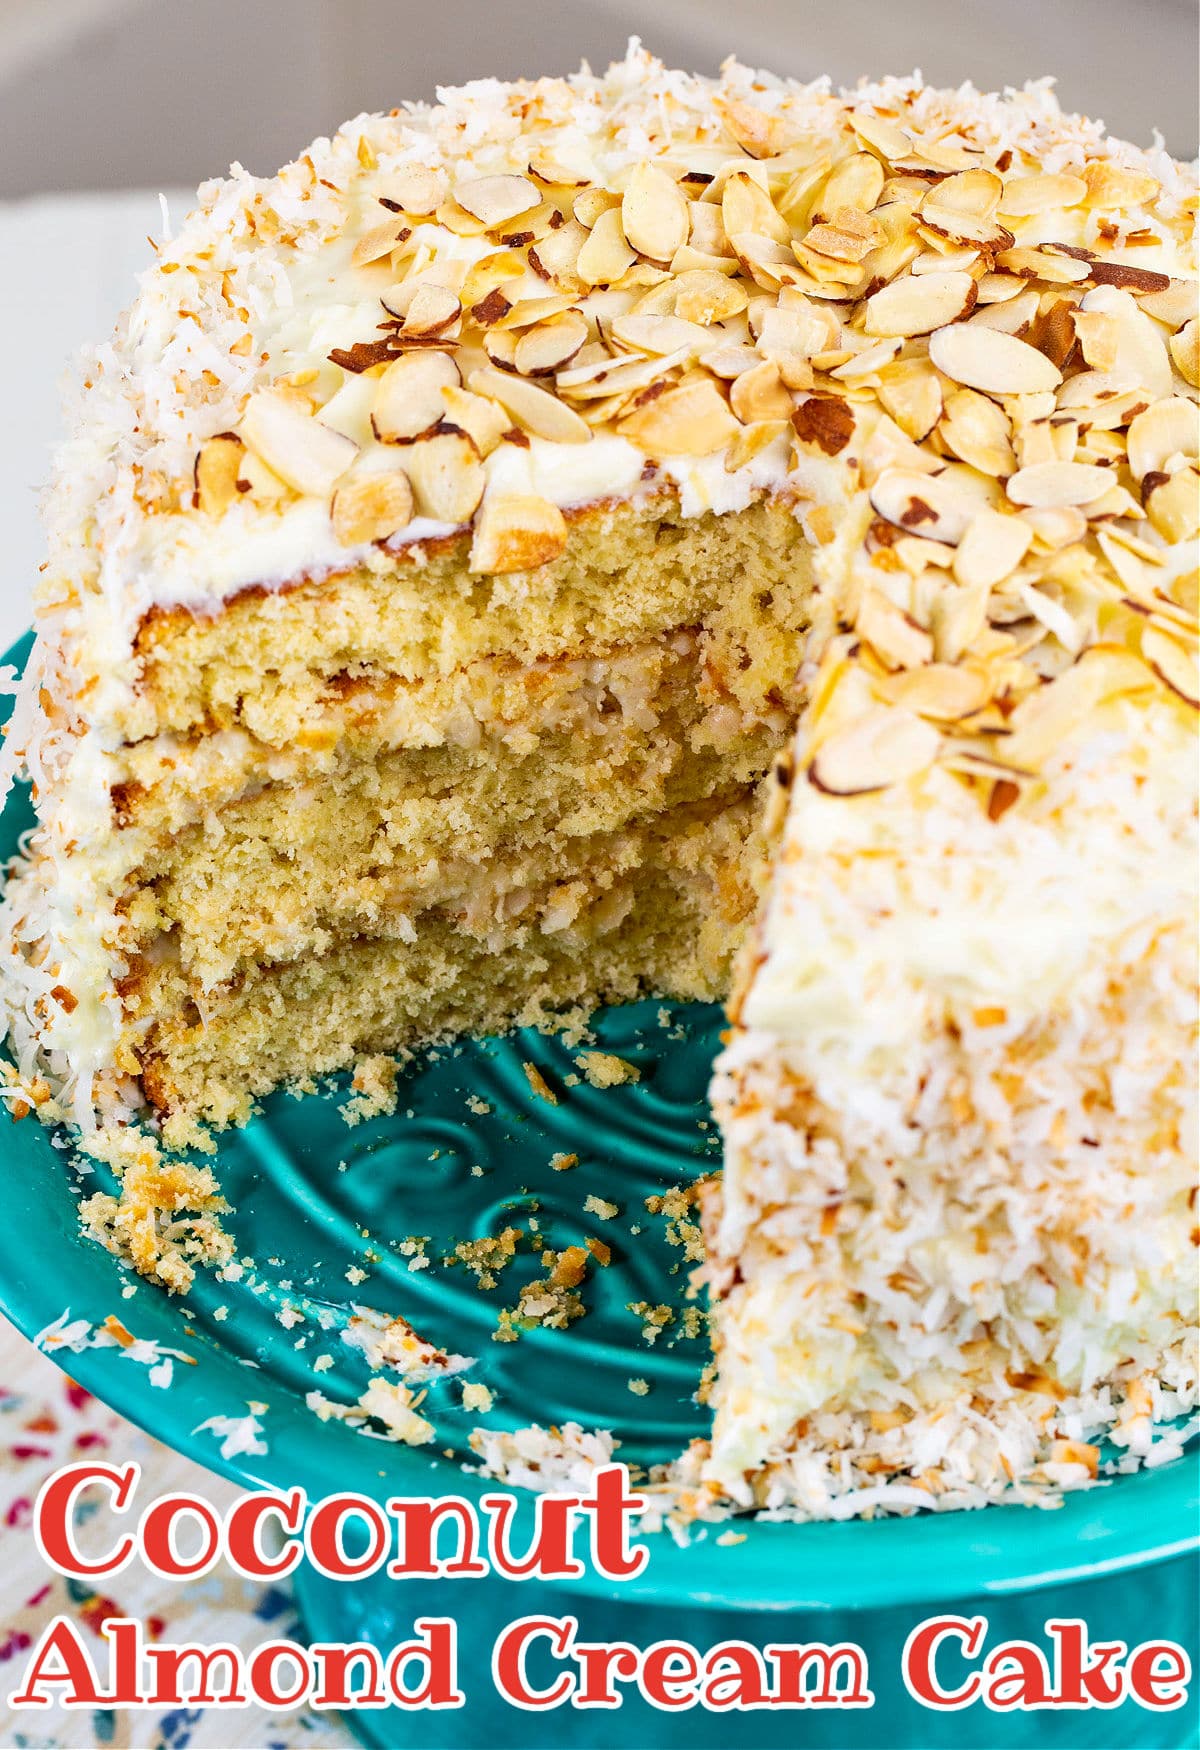 Coconut Almond Cream Cake with slice cut out of it.